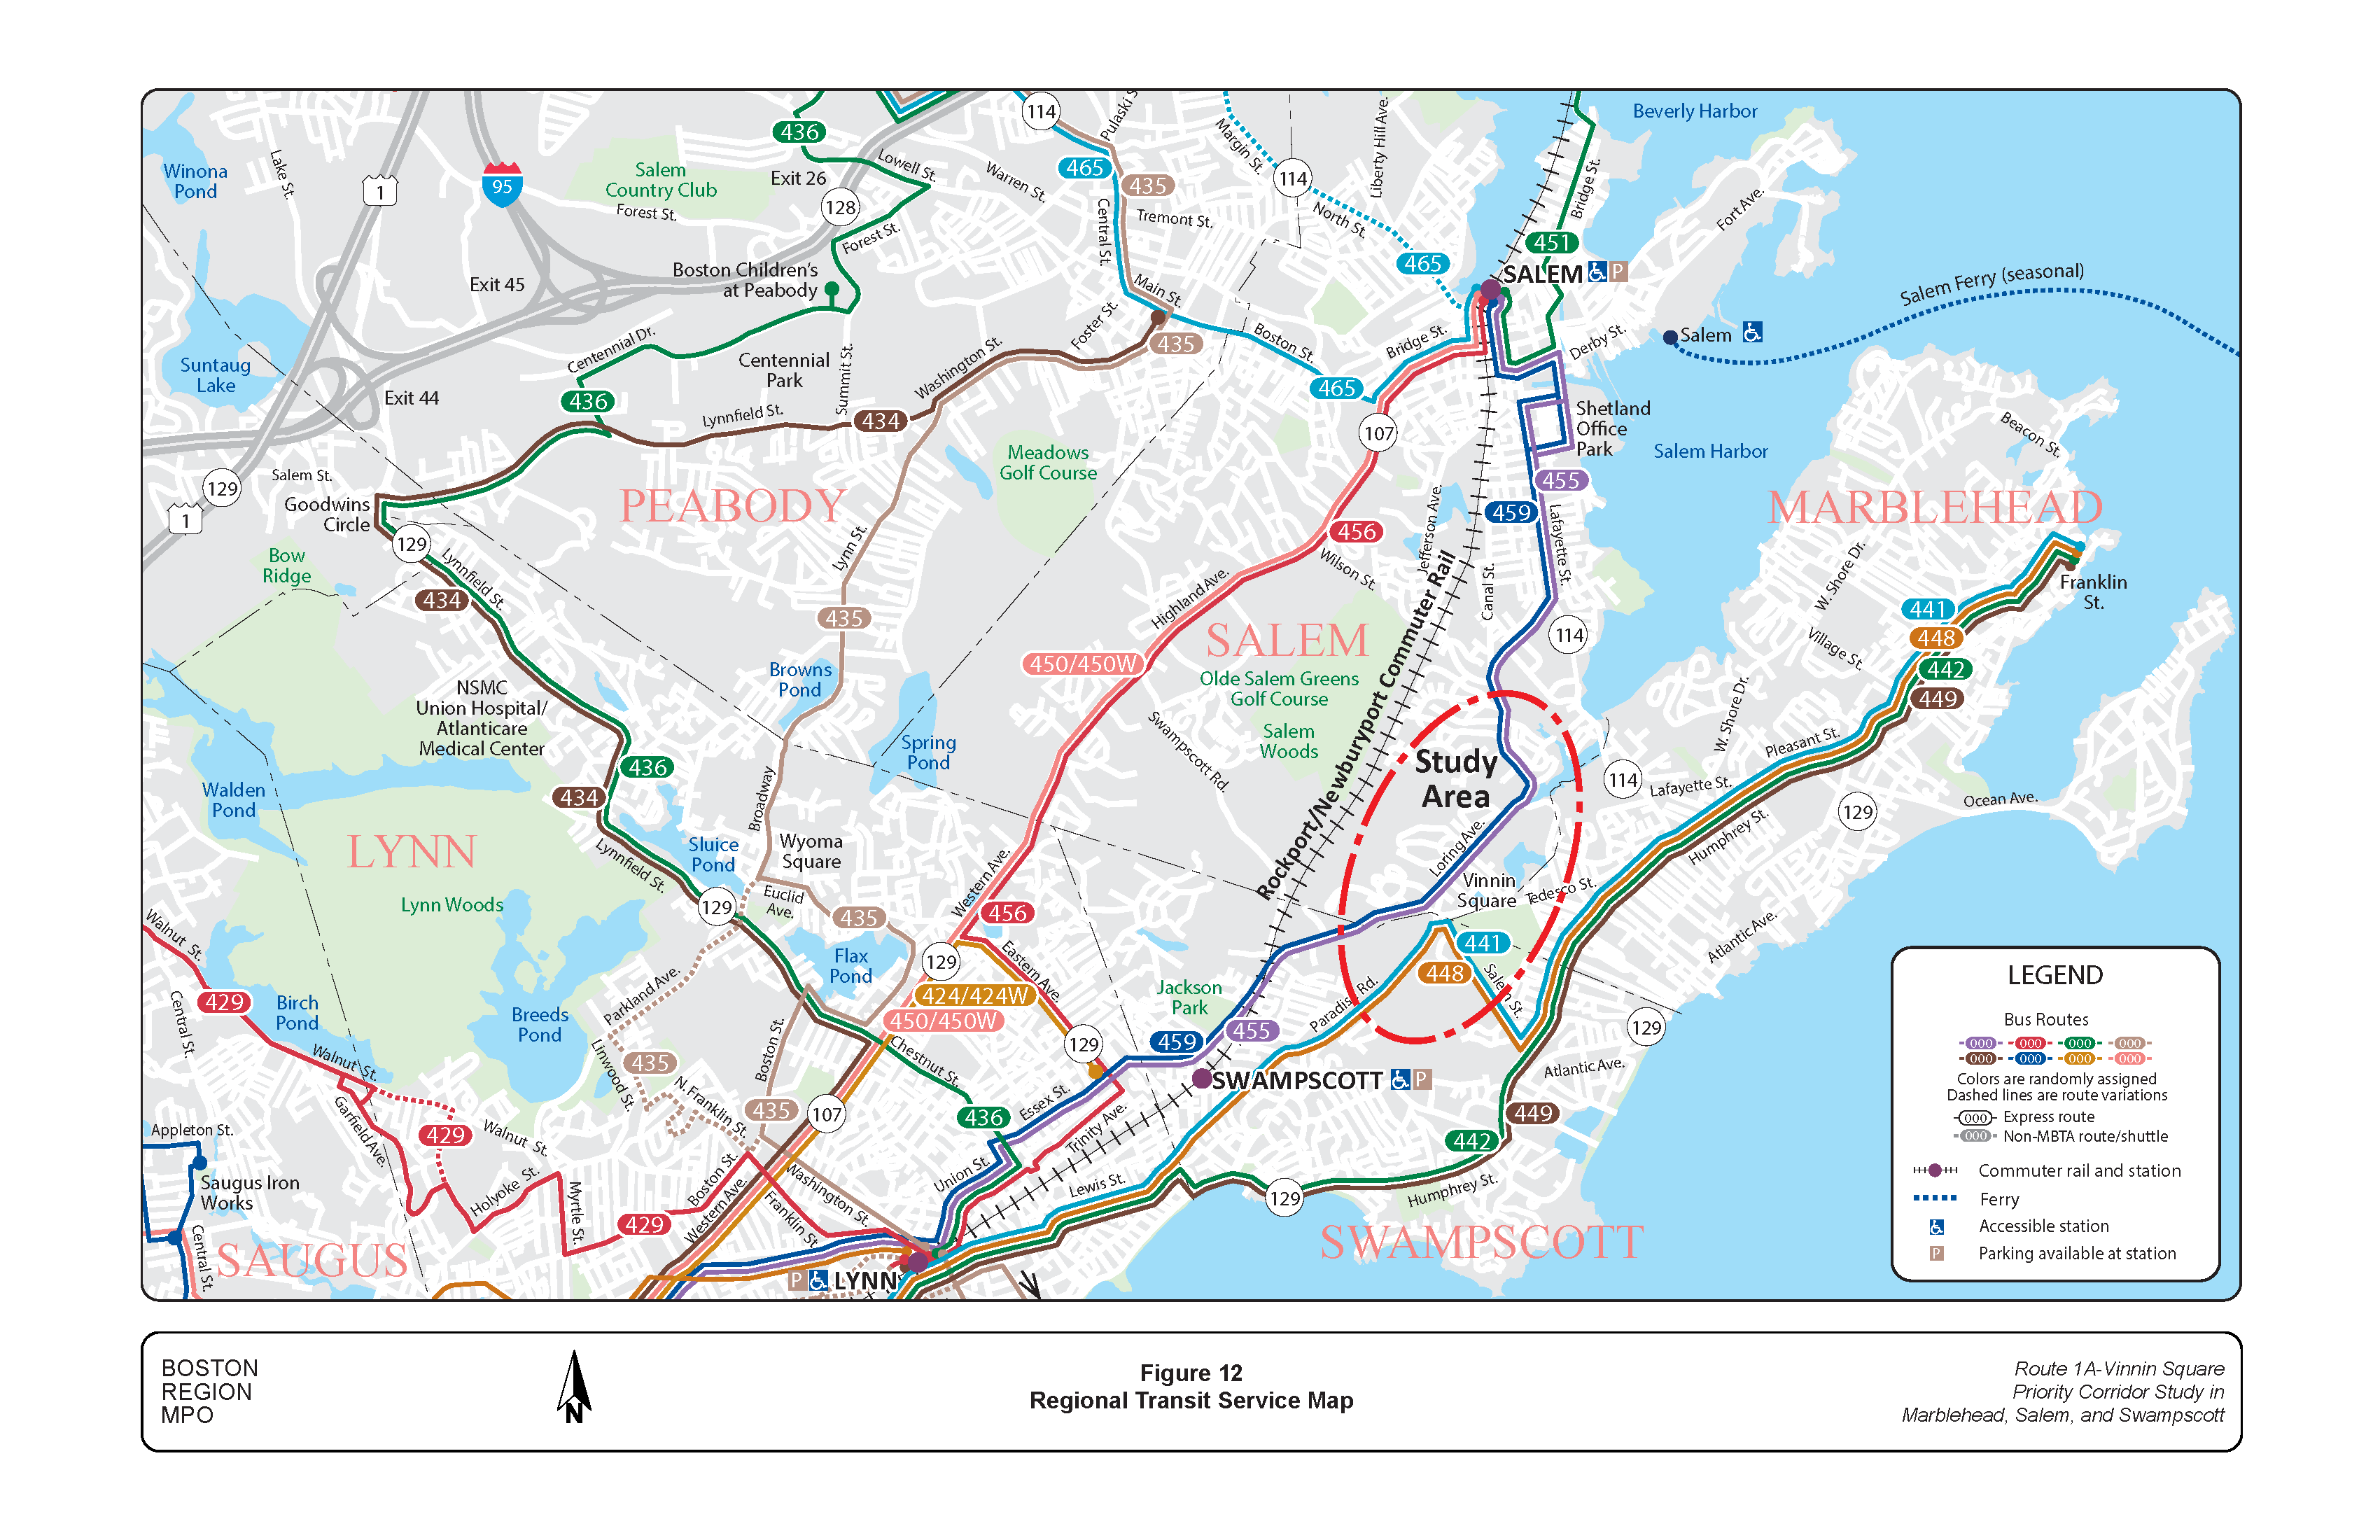 FIGURE 12. Regional Transit Service Map.Figure 12 is a map of the North Shore showing regional transit services: bus routes; commuter rail lines and stations; and ferries.